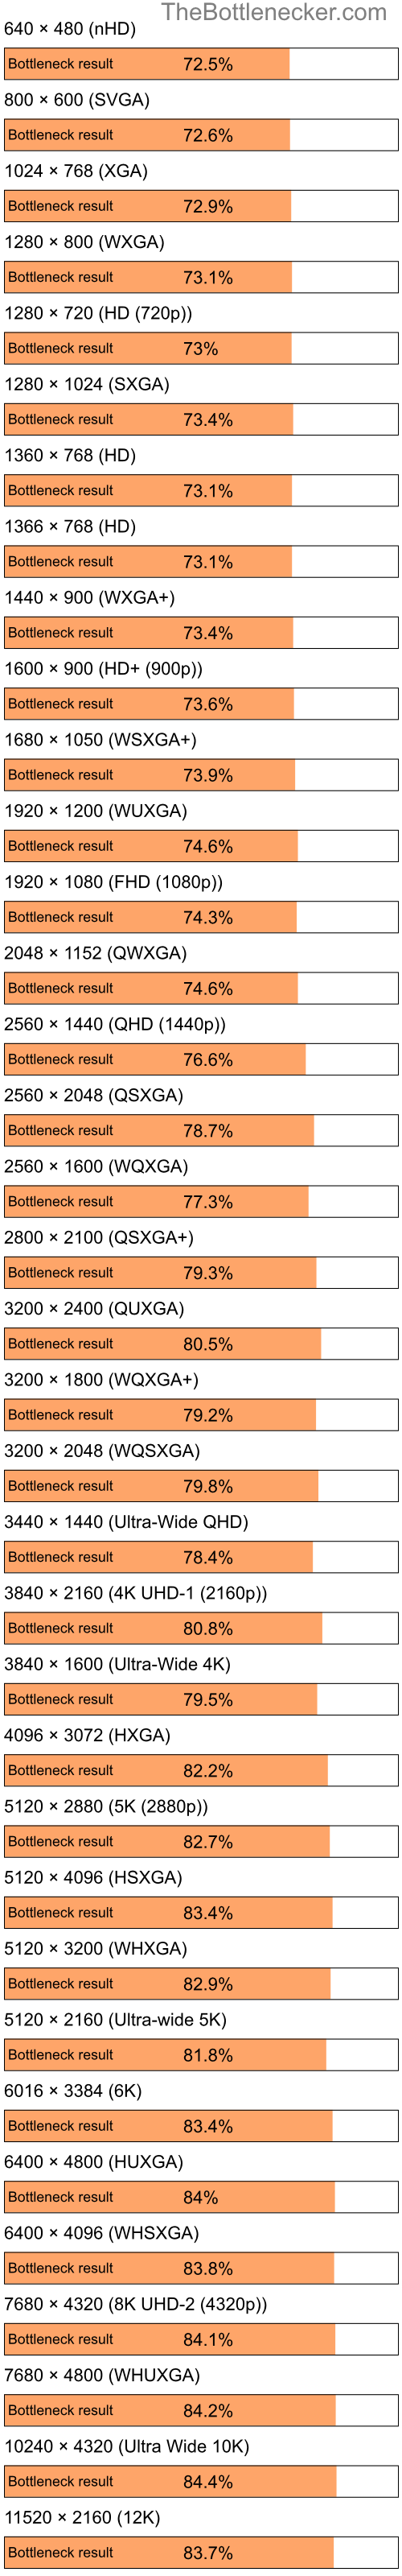 Bottleneck results by resolution for Intel Pentium 4 and NVIDIA GeForce FX 5700LE in Processor Intense Tasks